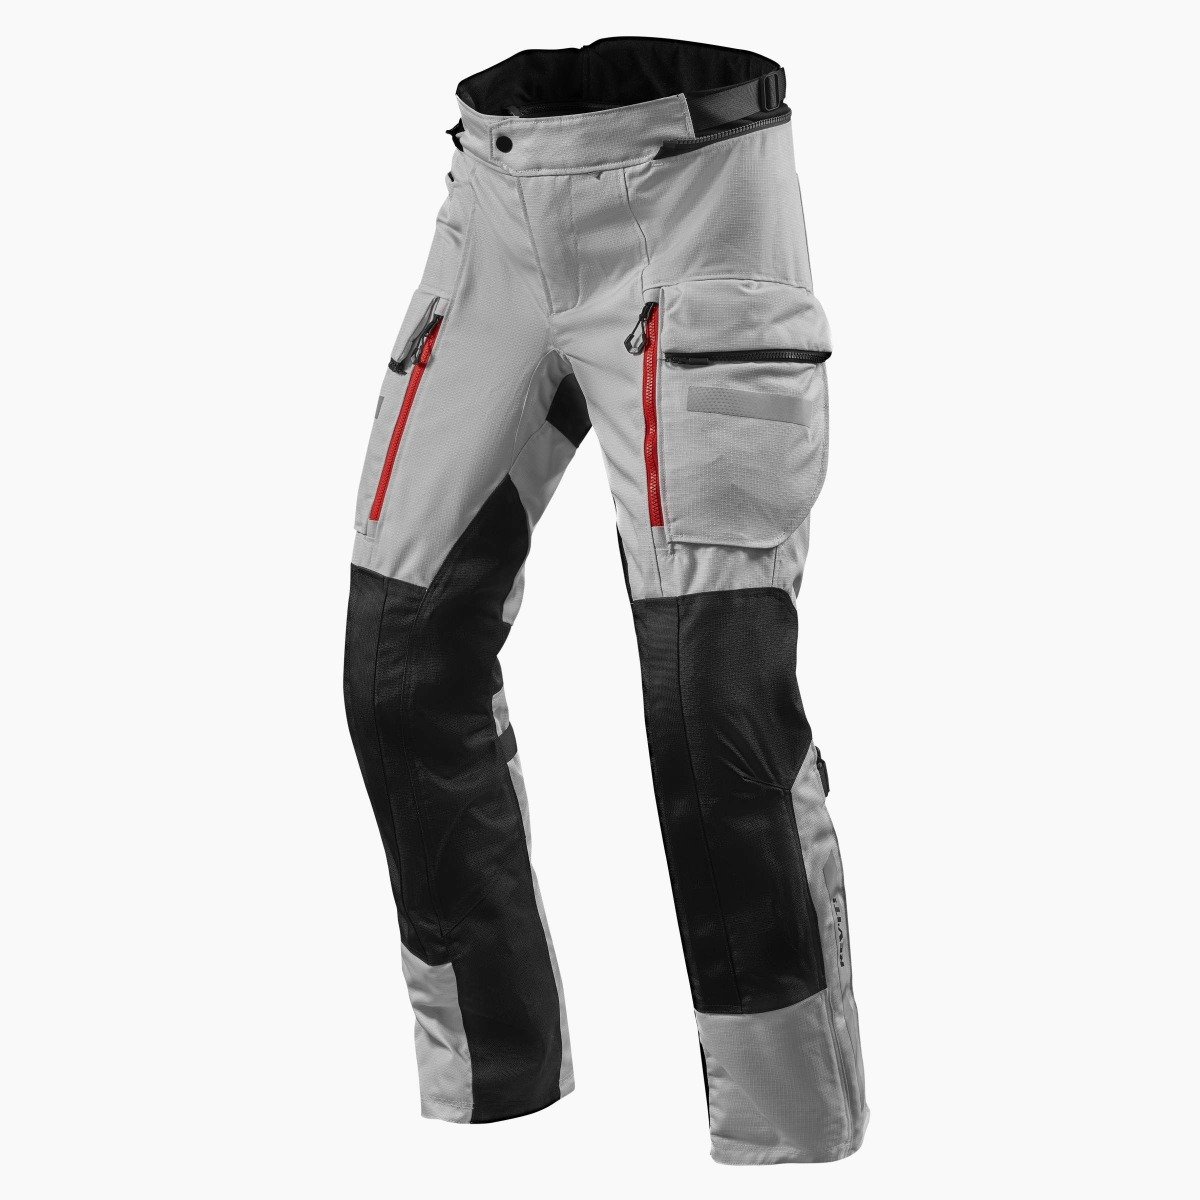 Image of REV'IT! Sand 4 H2O Standard Silver Black Motorcycle Pants Size 2XL ID 8700001316453